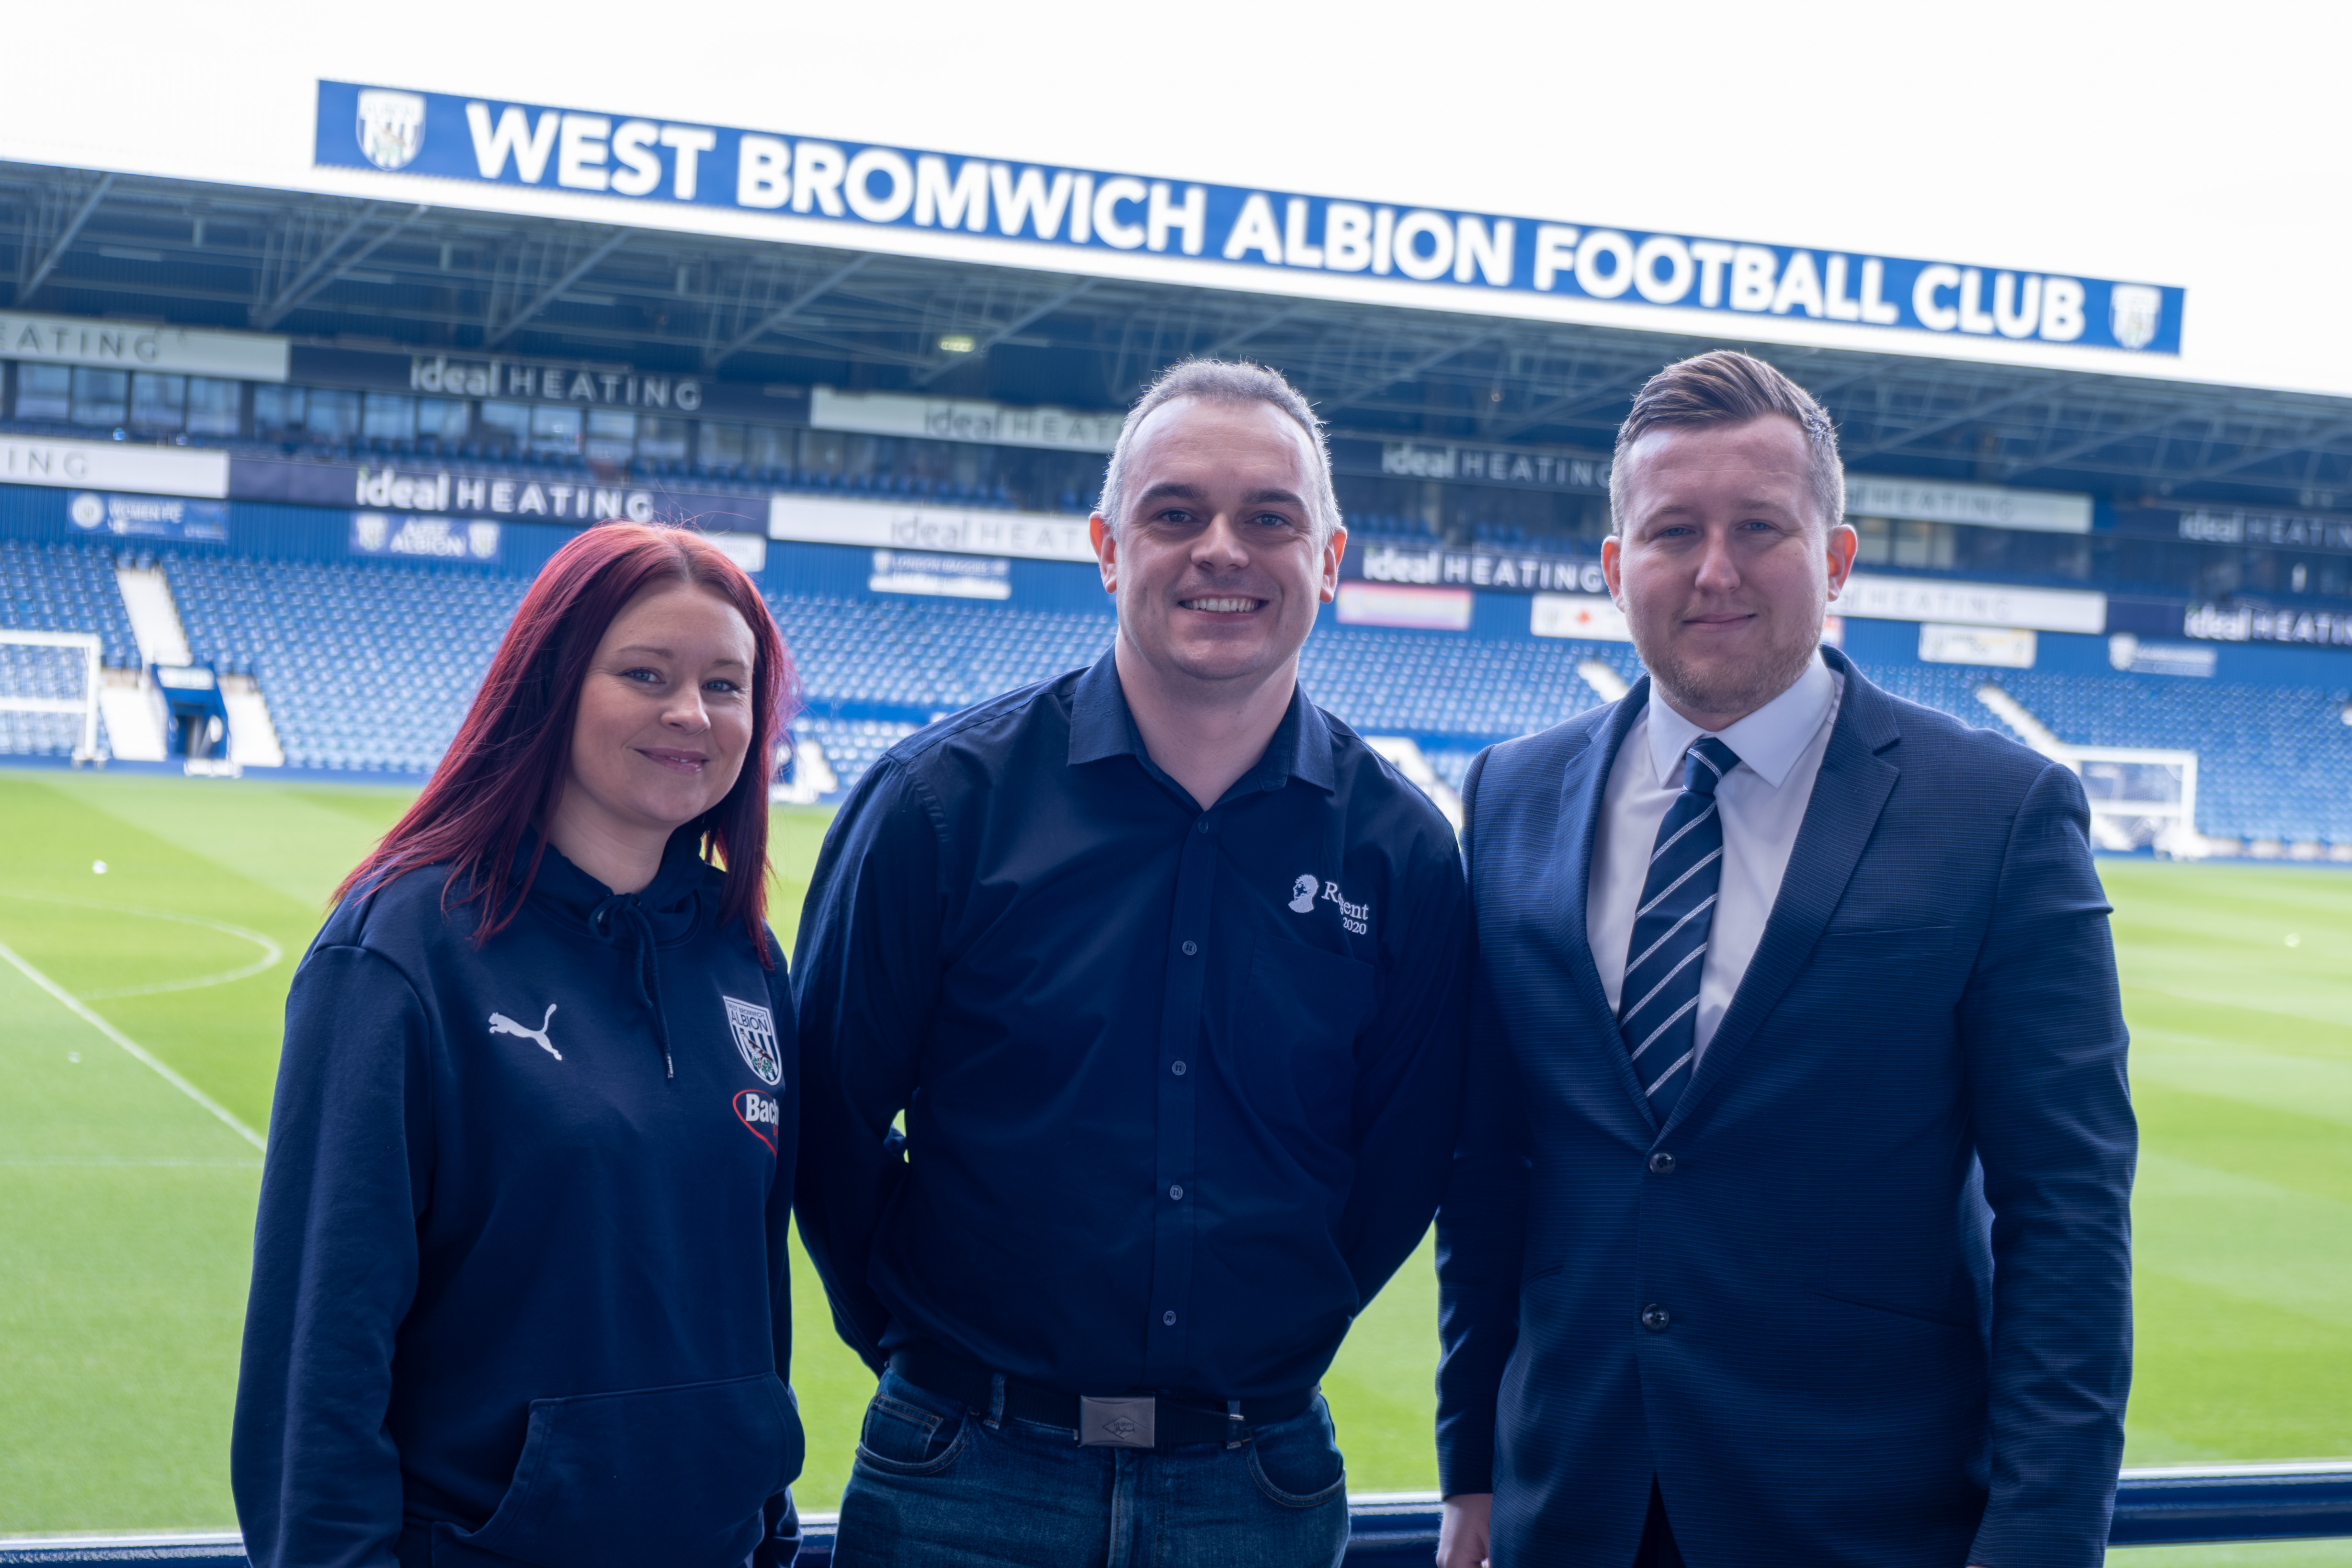 Jayne Norton & Jon Ward from The Albion Foundation at The Hawthorns with Scott Jones from Regent Publicity